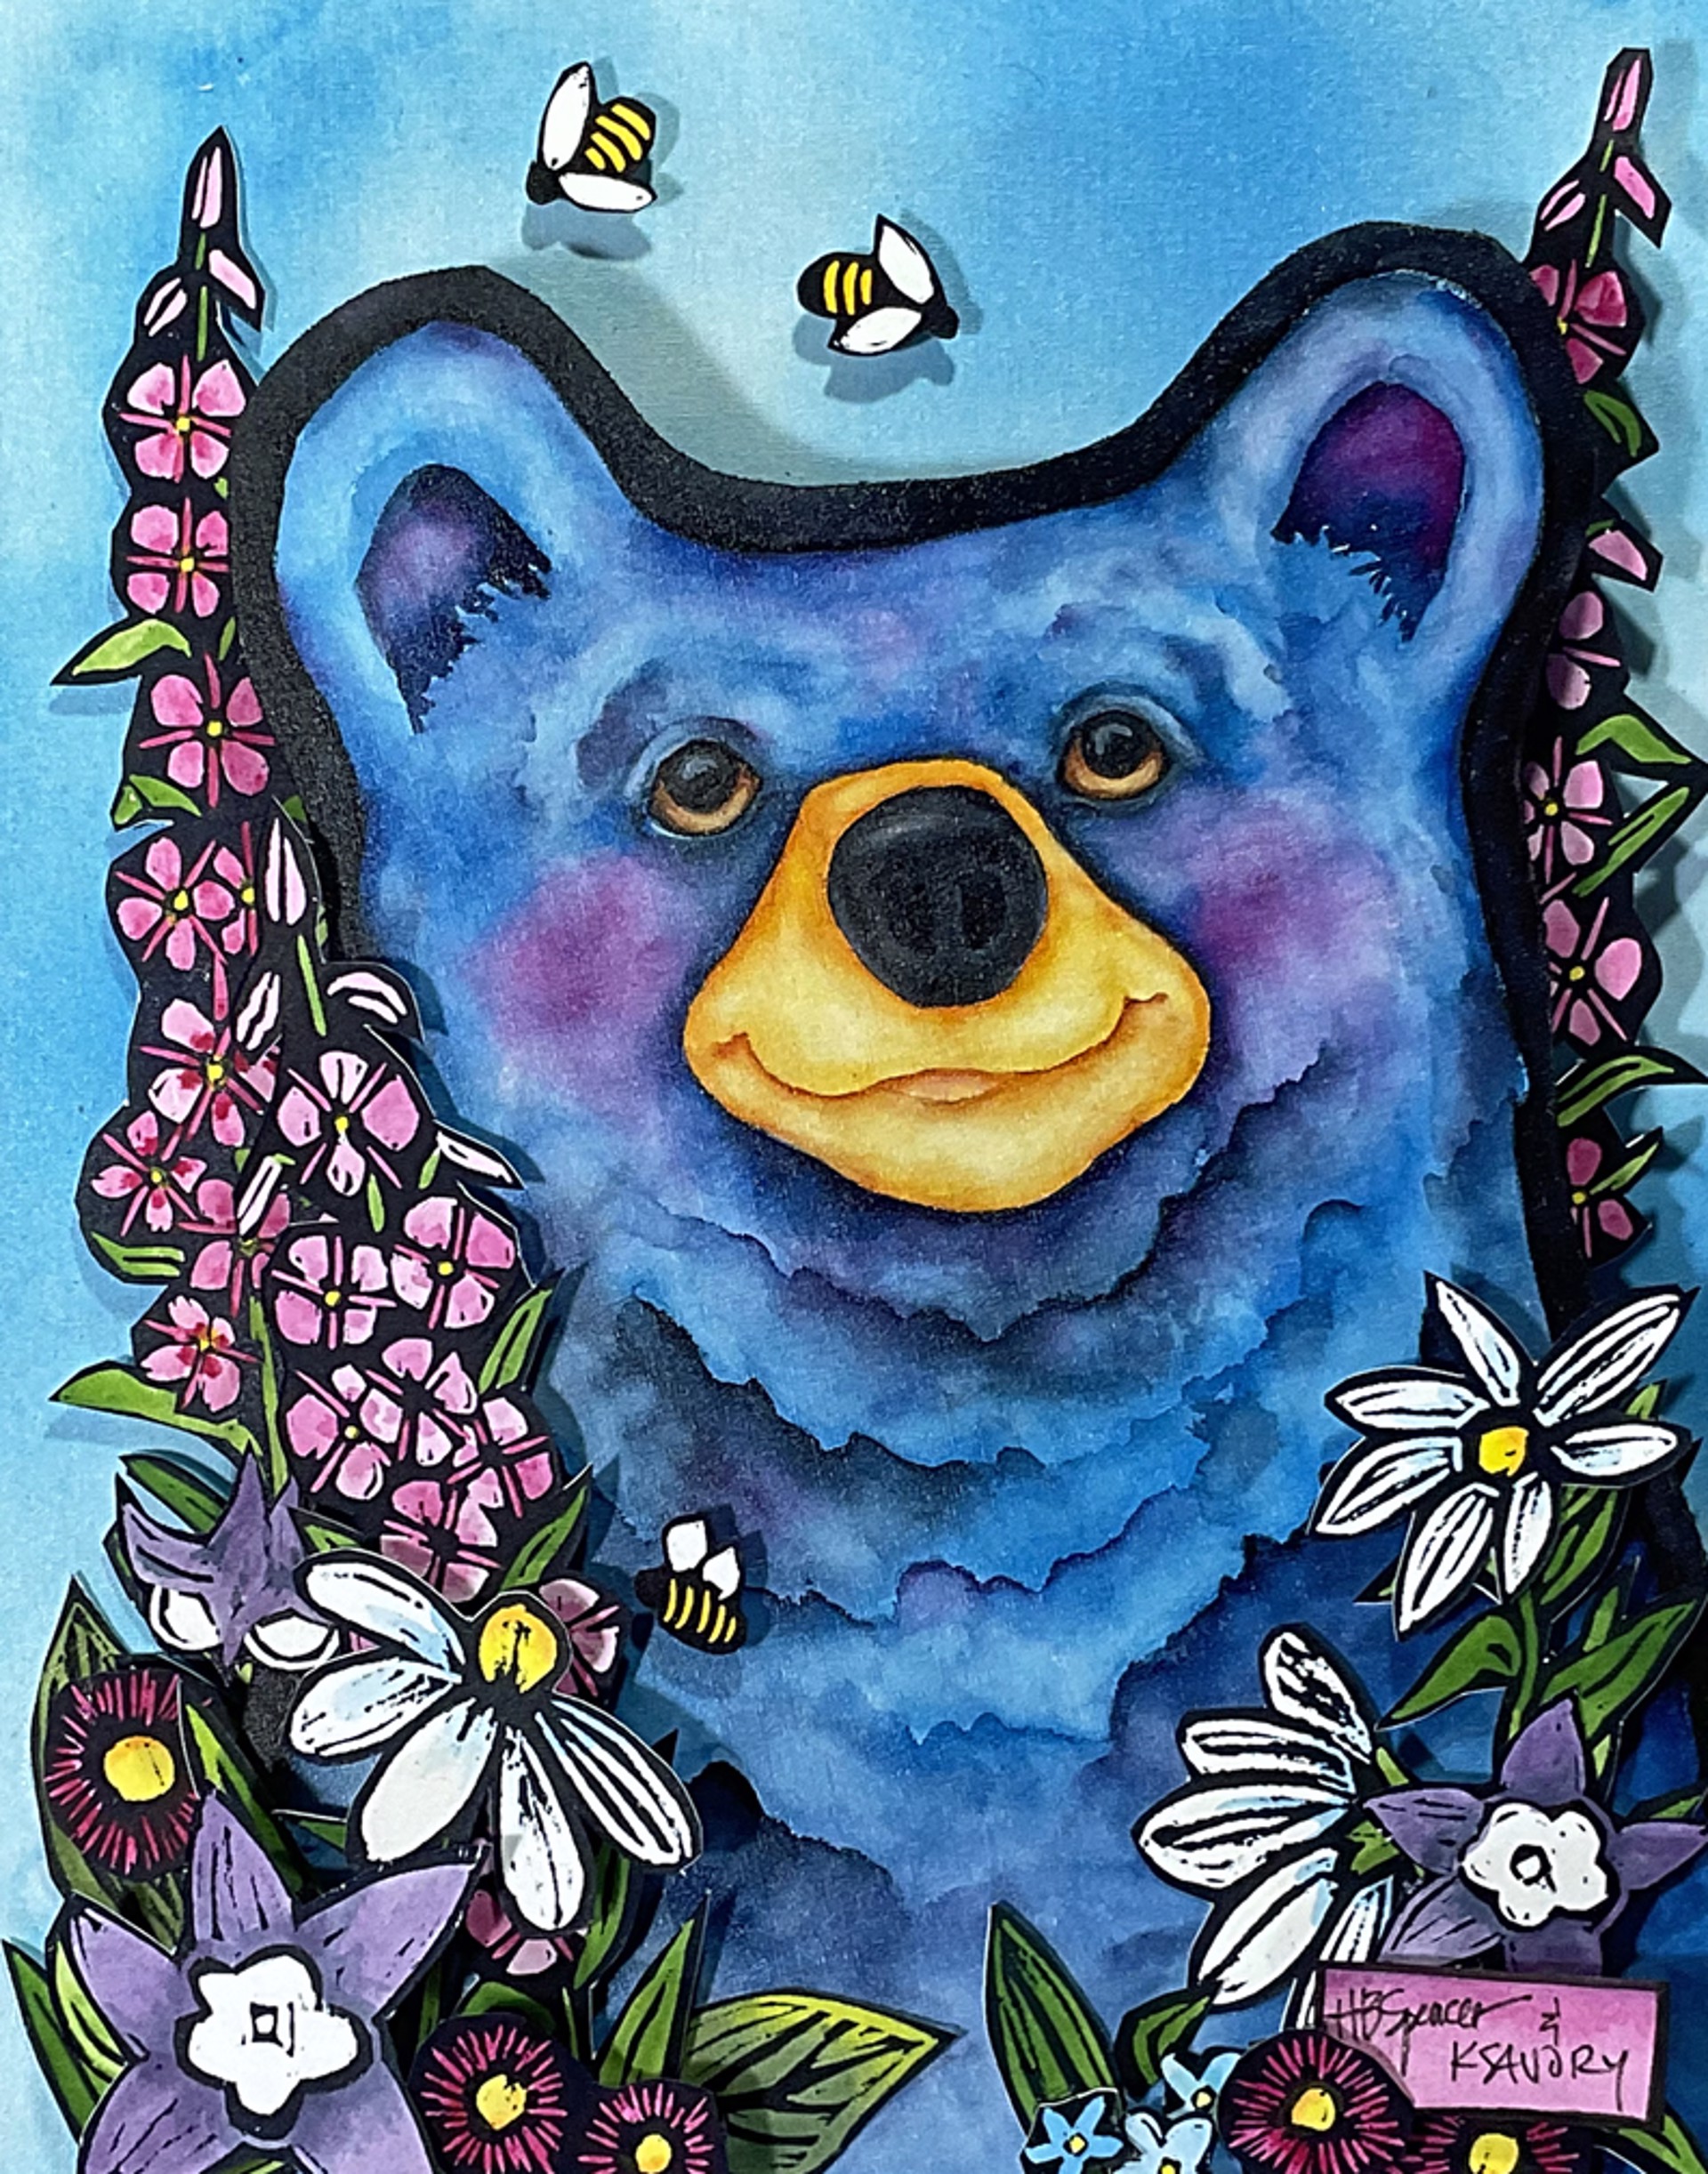 Bees, Bears, and Blooms (Collaboration Hannah B.Spencer and Karen Savory) by Karen Savory